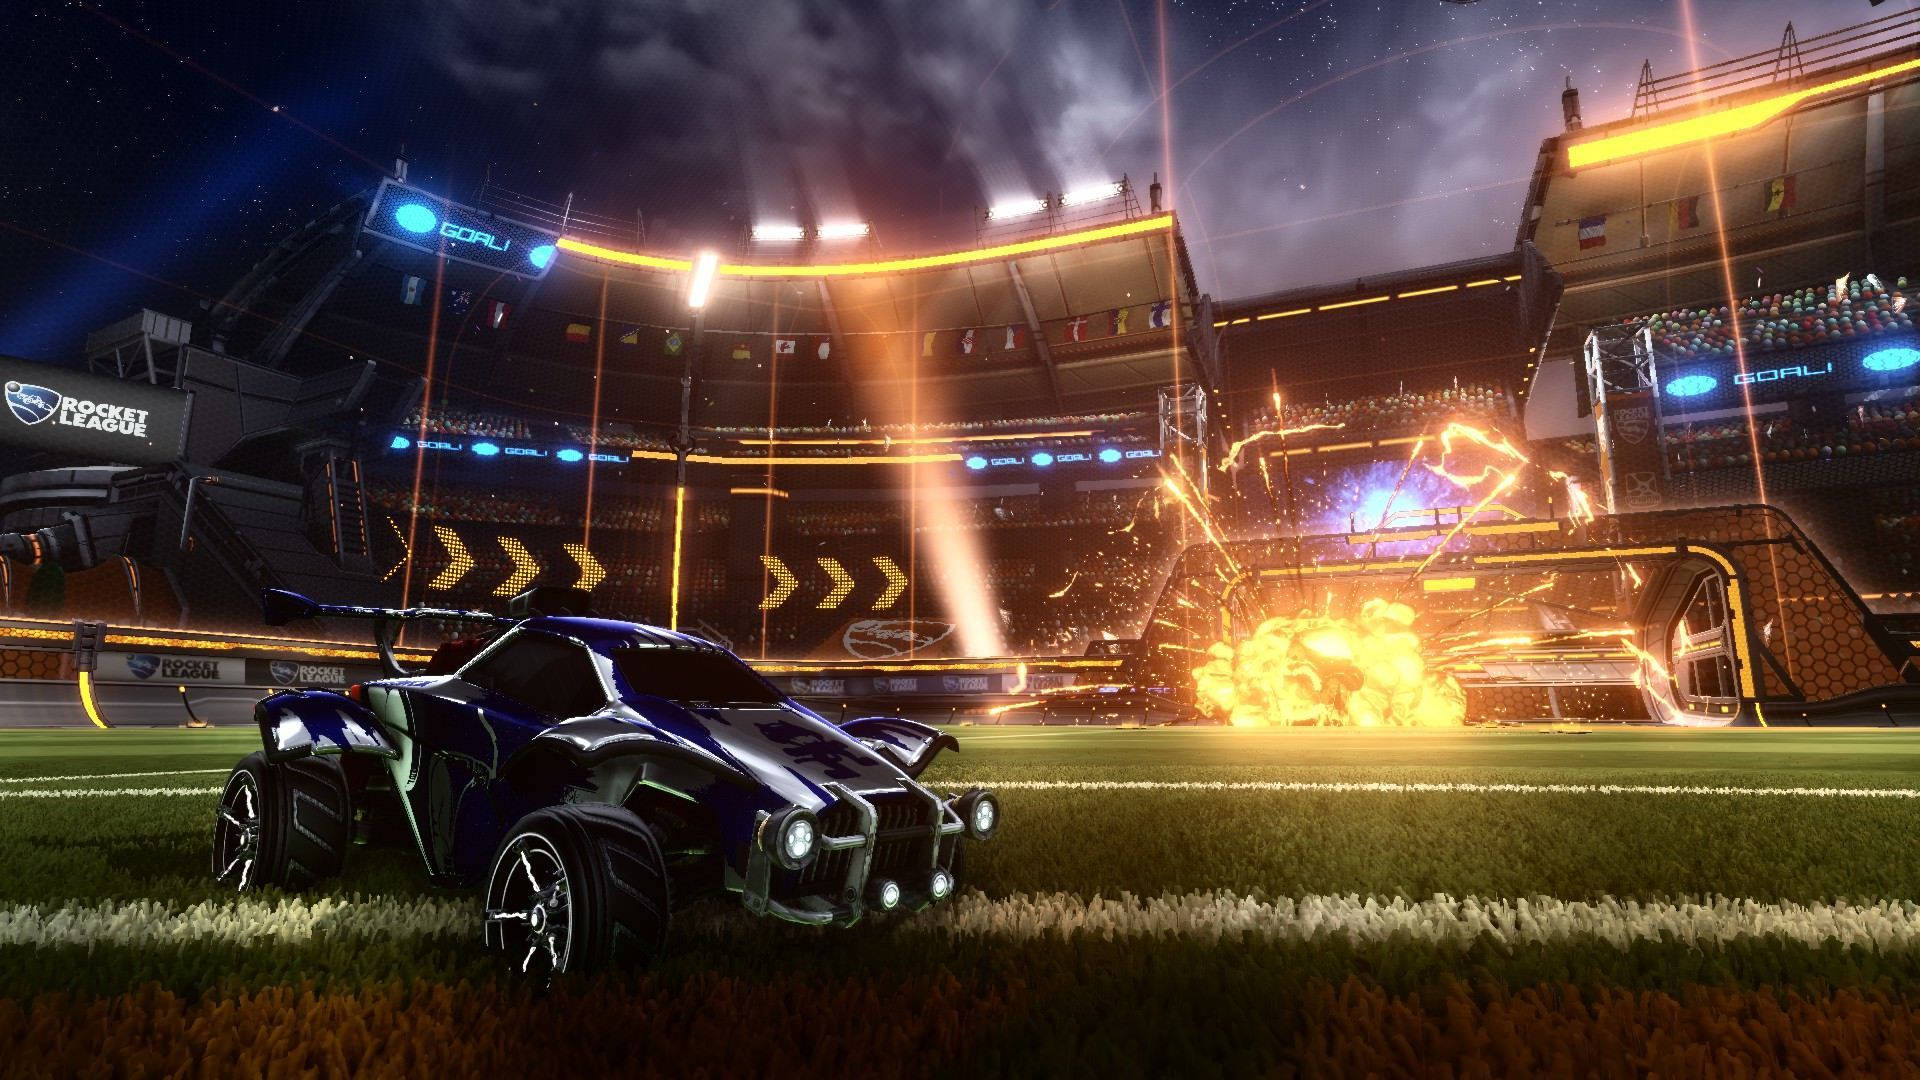 Cool Rocket League Blue Car In Arena Background